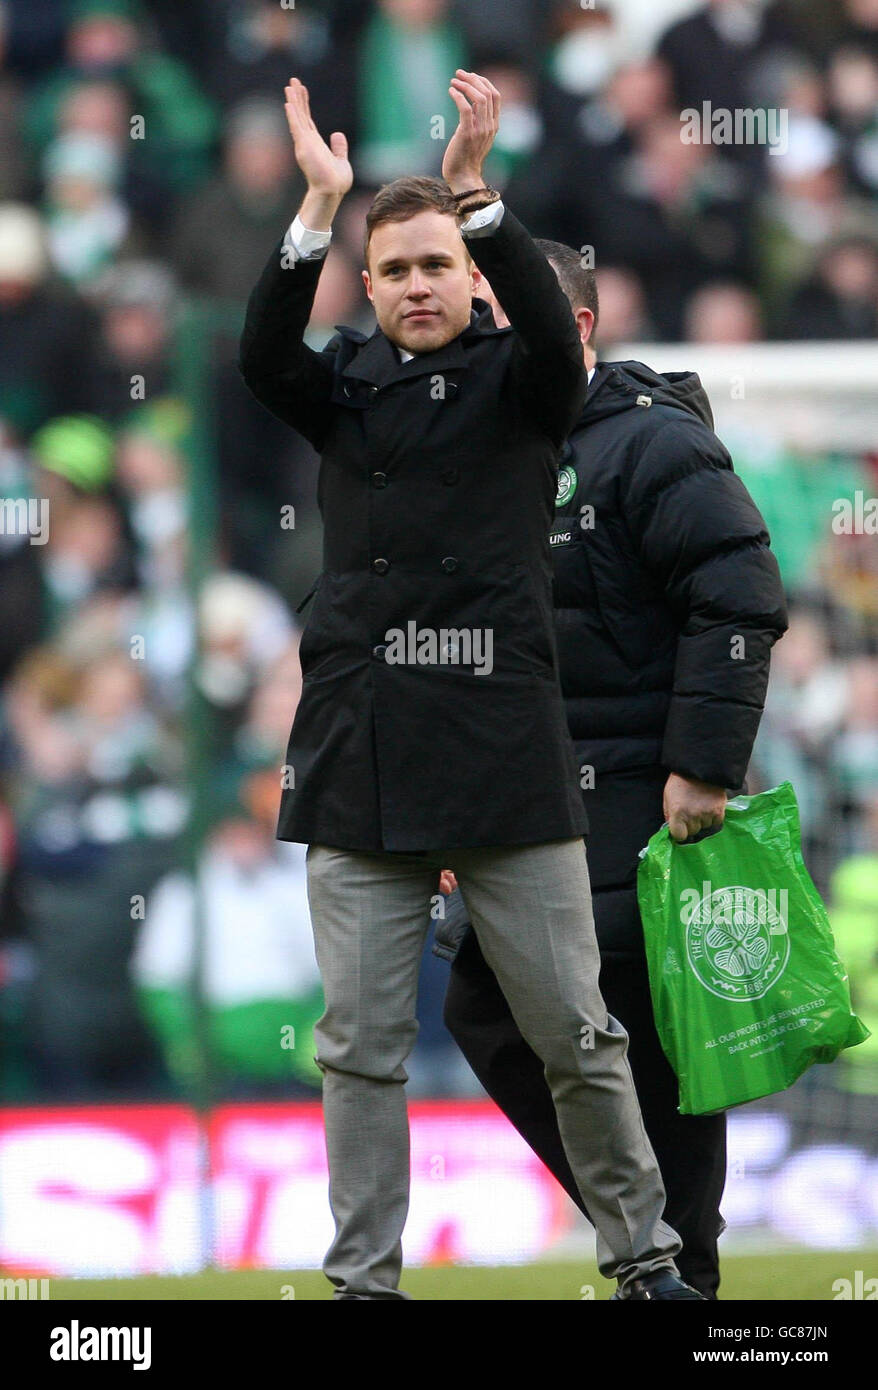 x-factor-runner-up-olly-murs-on-the-pitch-at-half-time-during-the-GC87JN.jpg